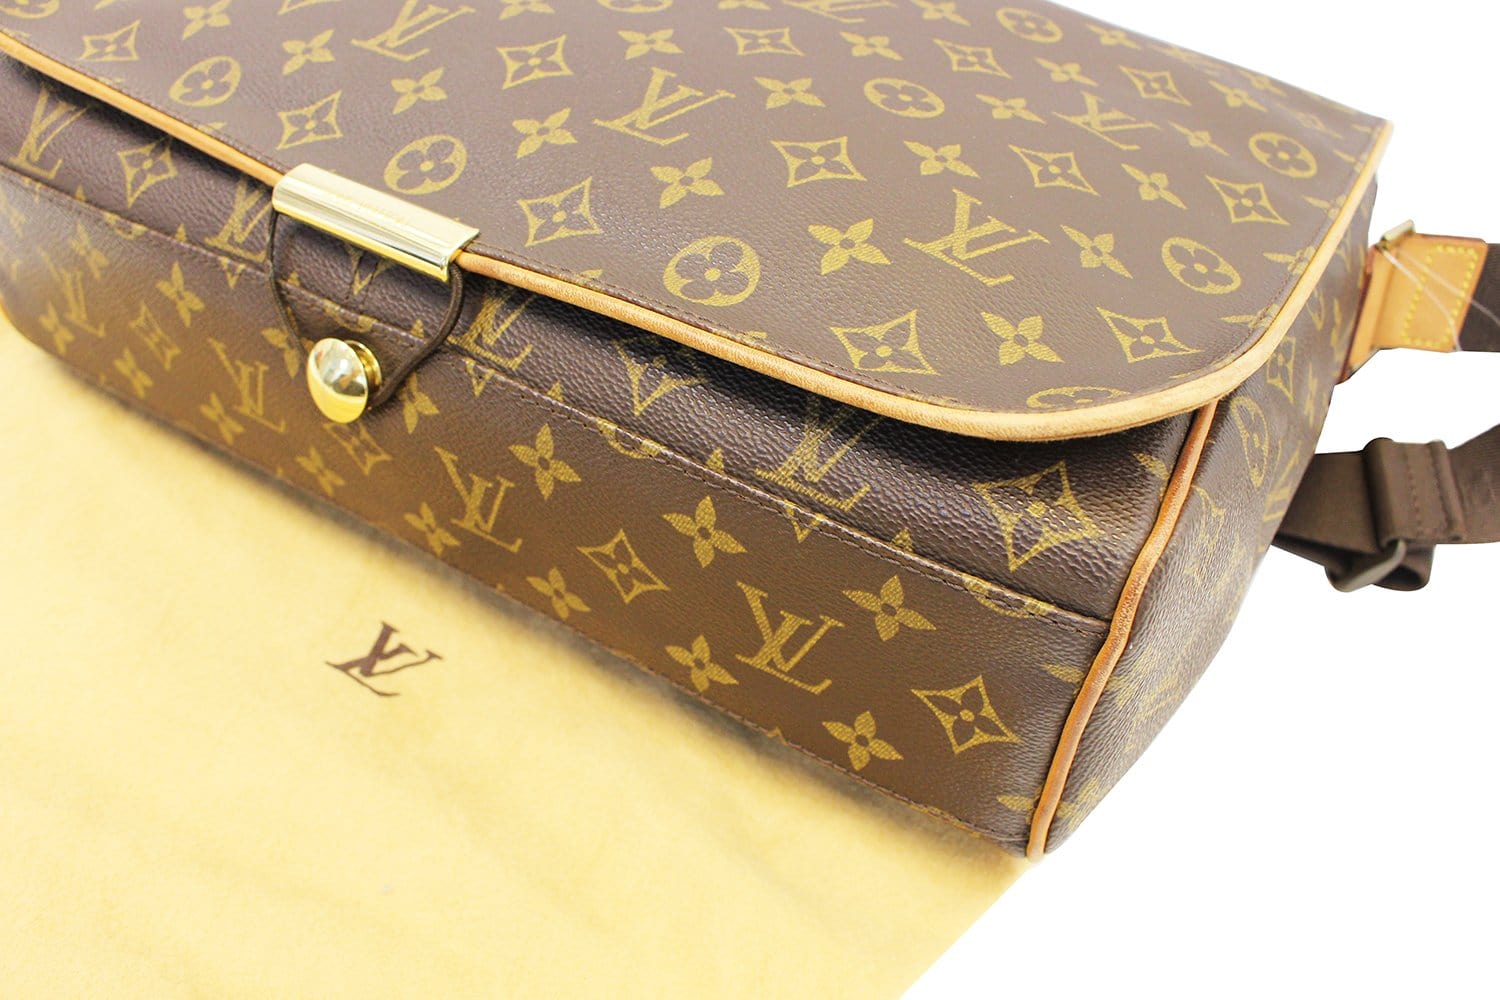 Louis Vuitton Abbesses Messenger Bag in Damier Ebene Canvas with Box in  United States